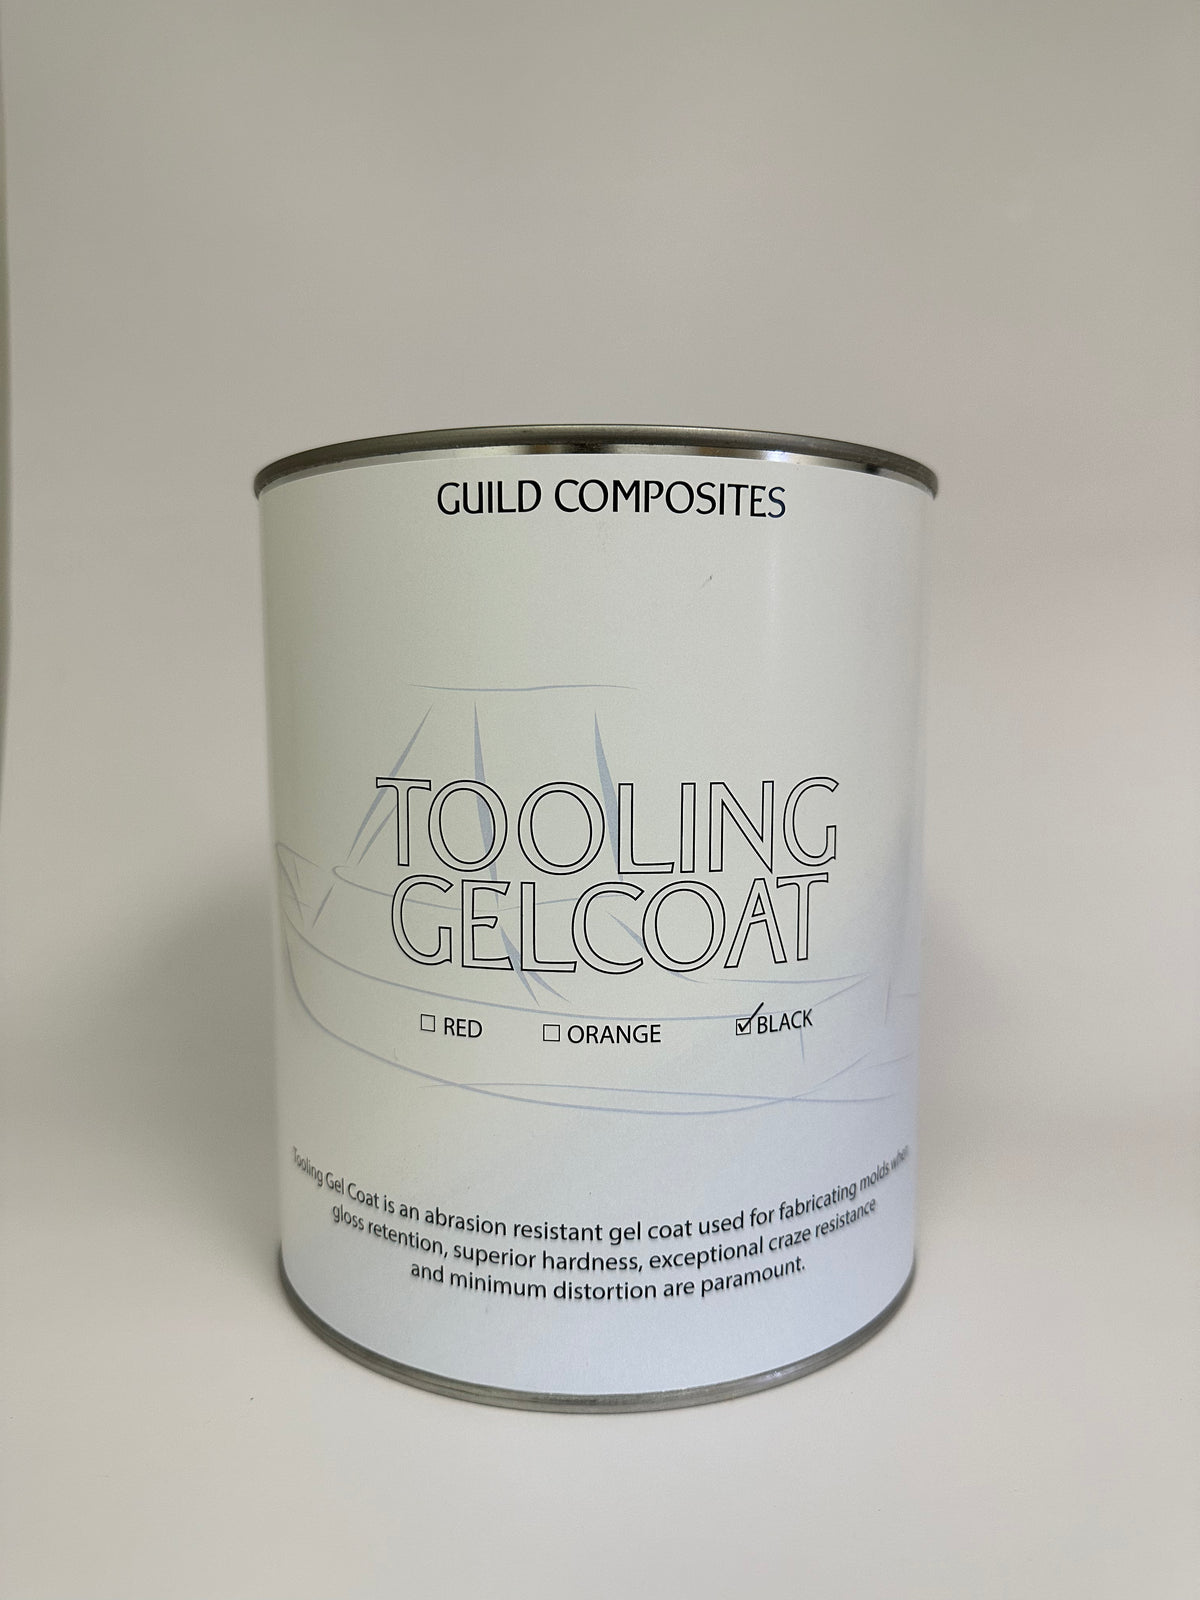 Tooling Gelcoat - Gallon